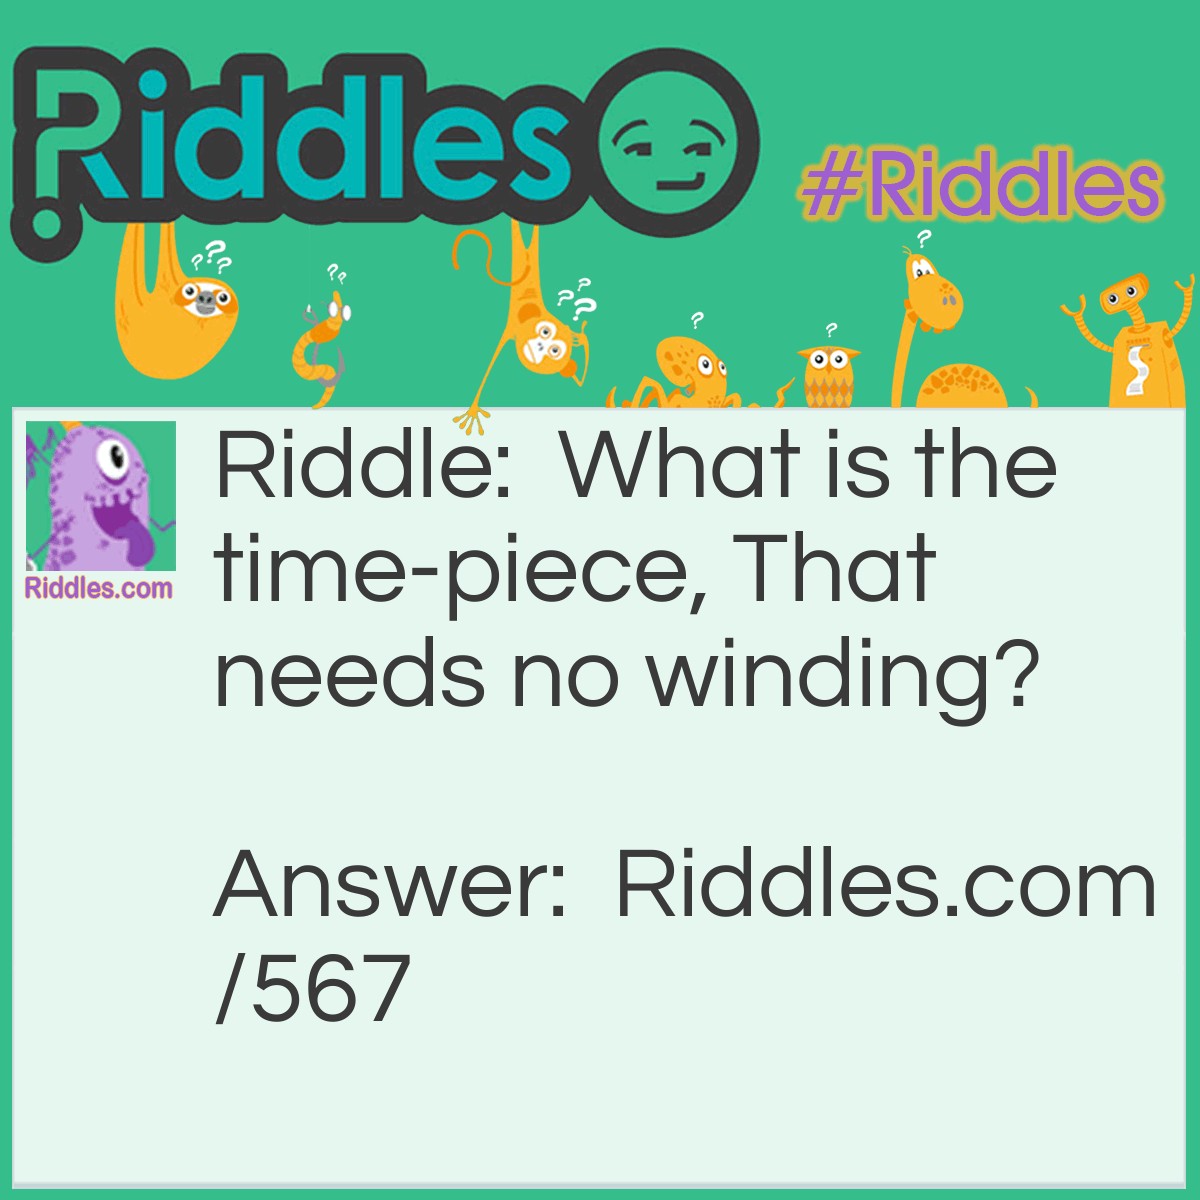 Riddle: What is the time-piece, That needs no winding? Answer: A rooster.